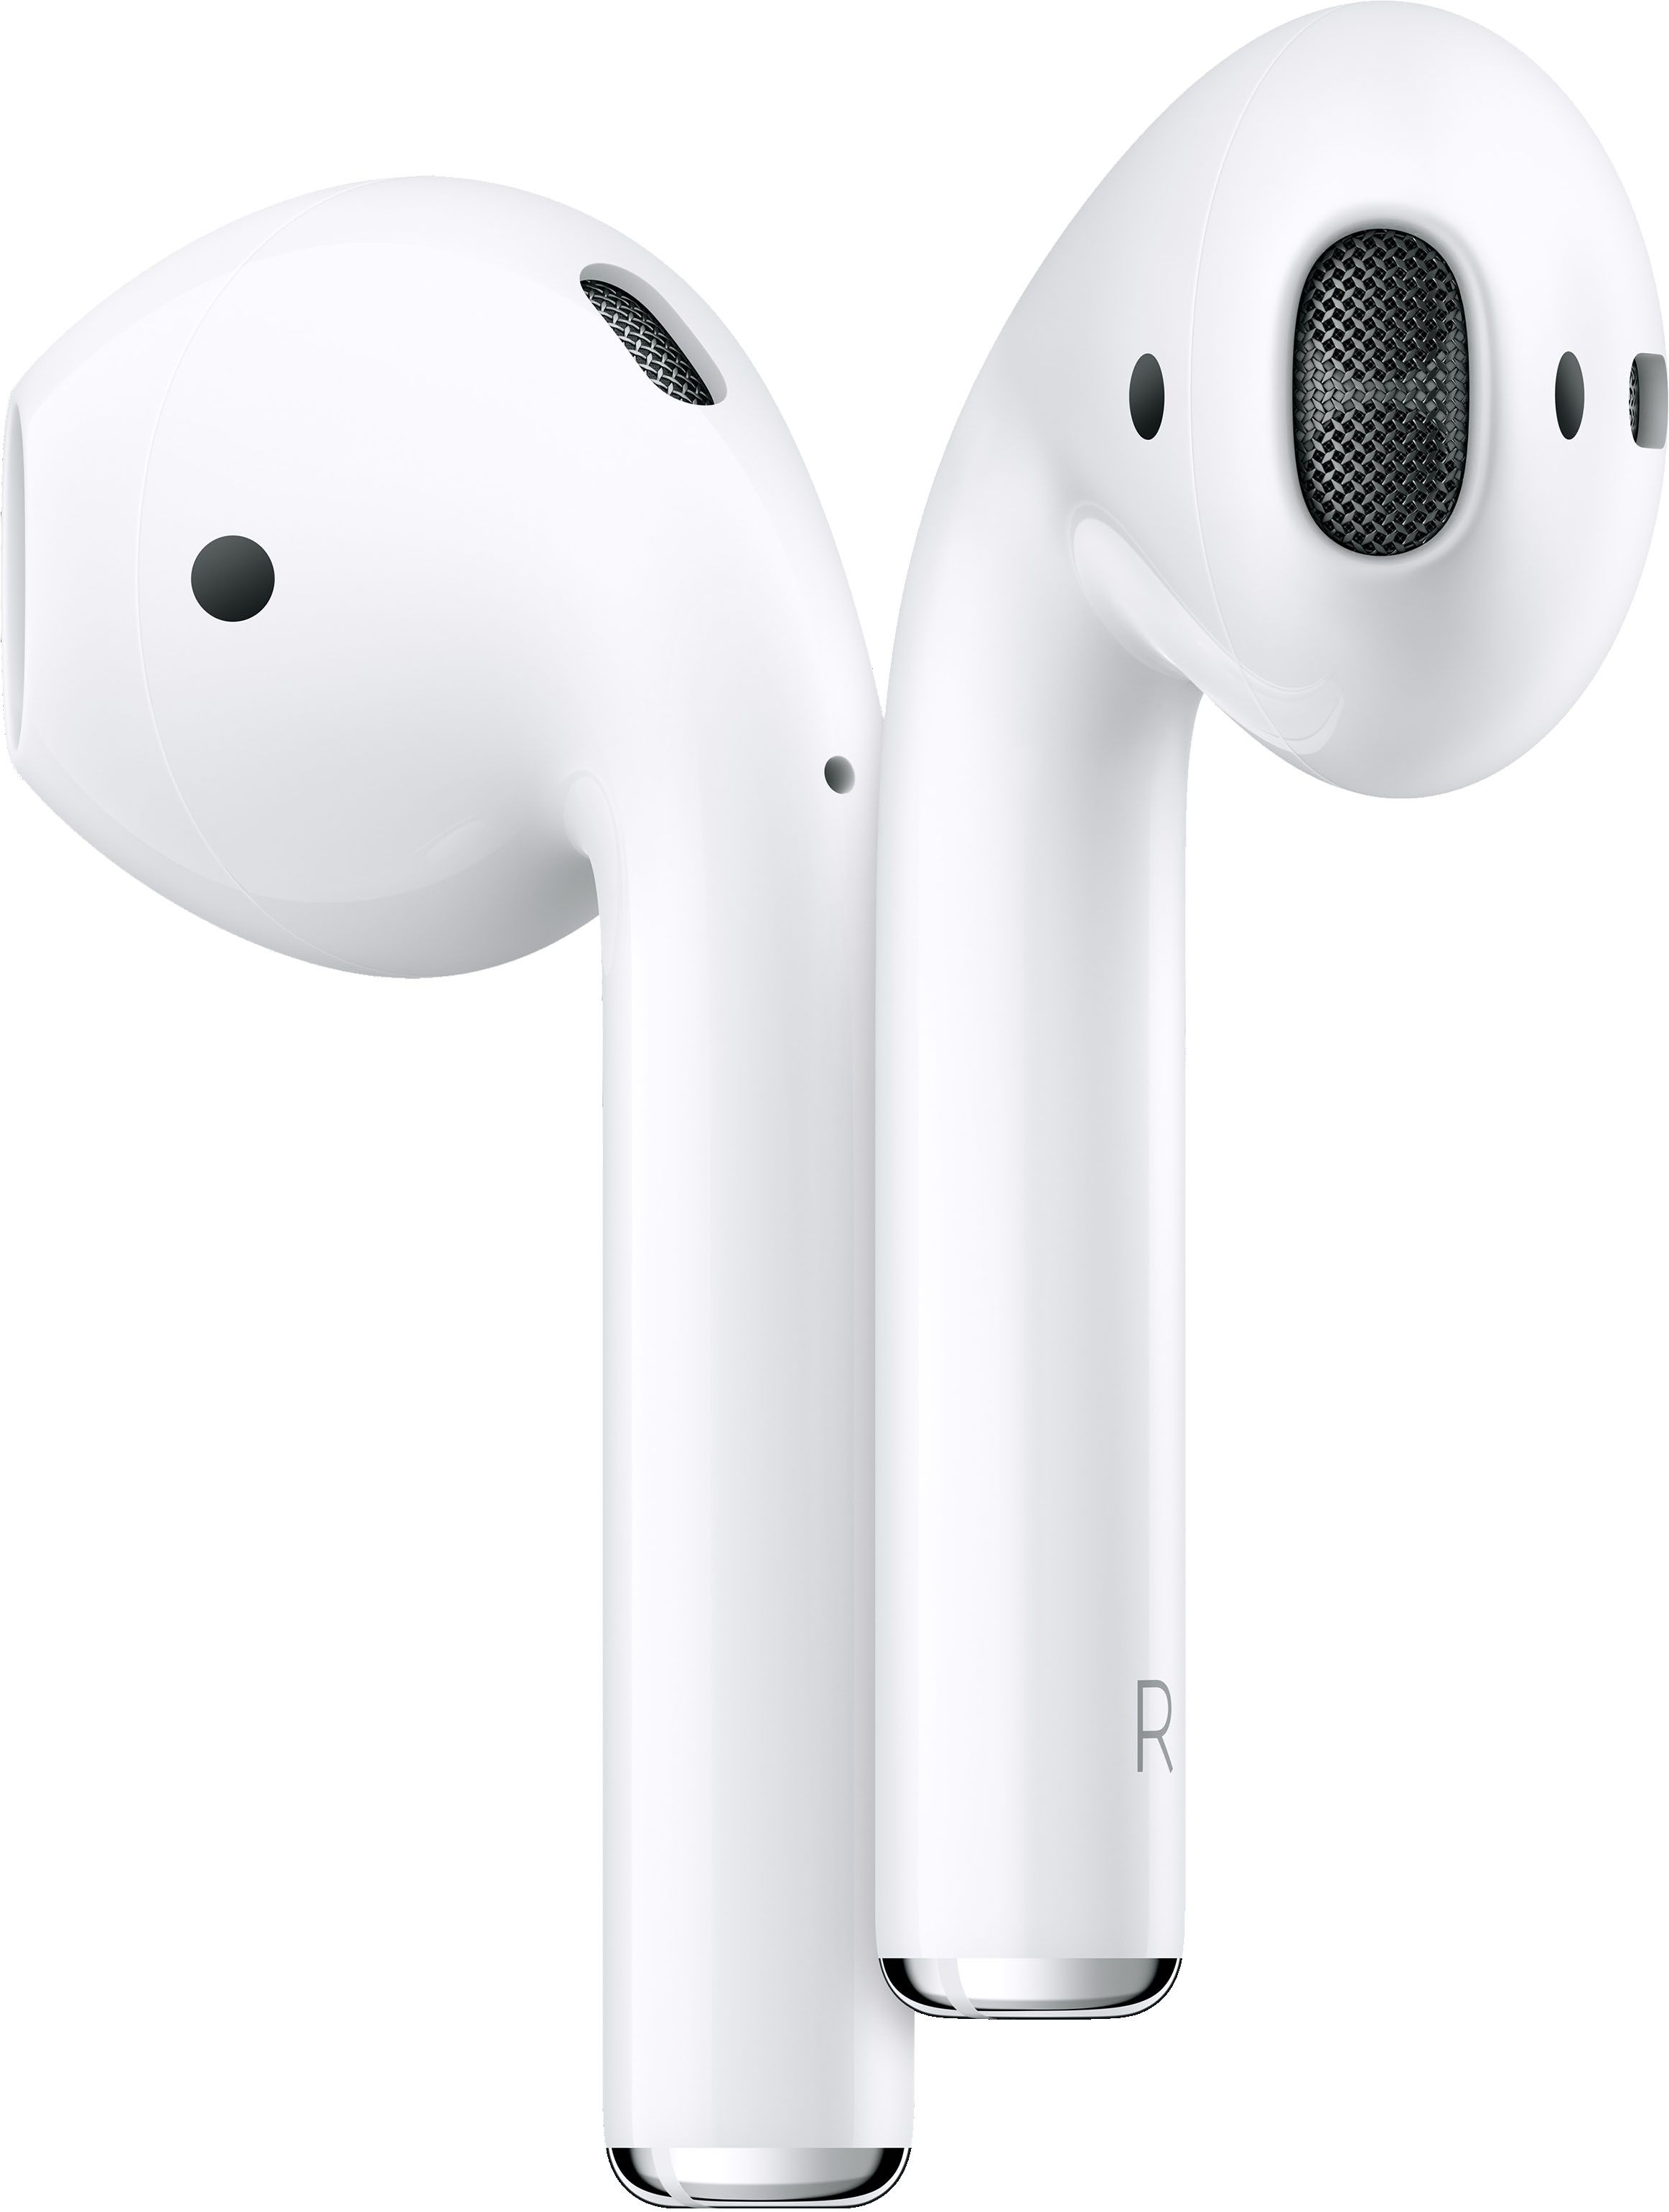 Apple Airpods with Wireless Charging Case White MRXJ2AM/A - Best Buy | Best Buy U.S.